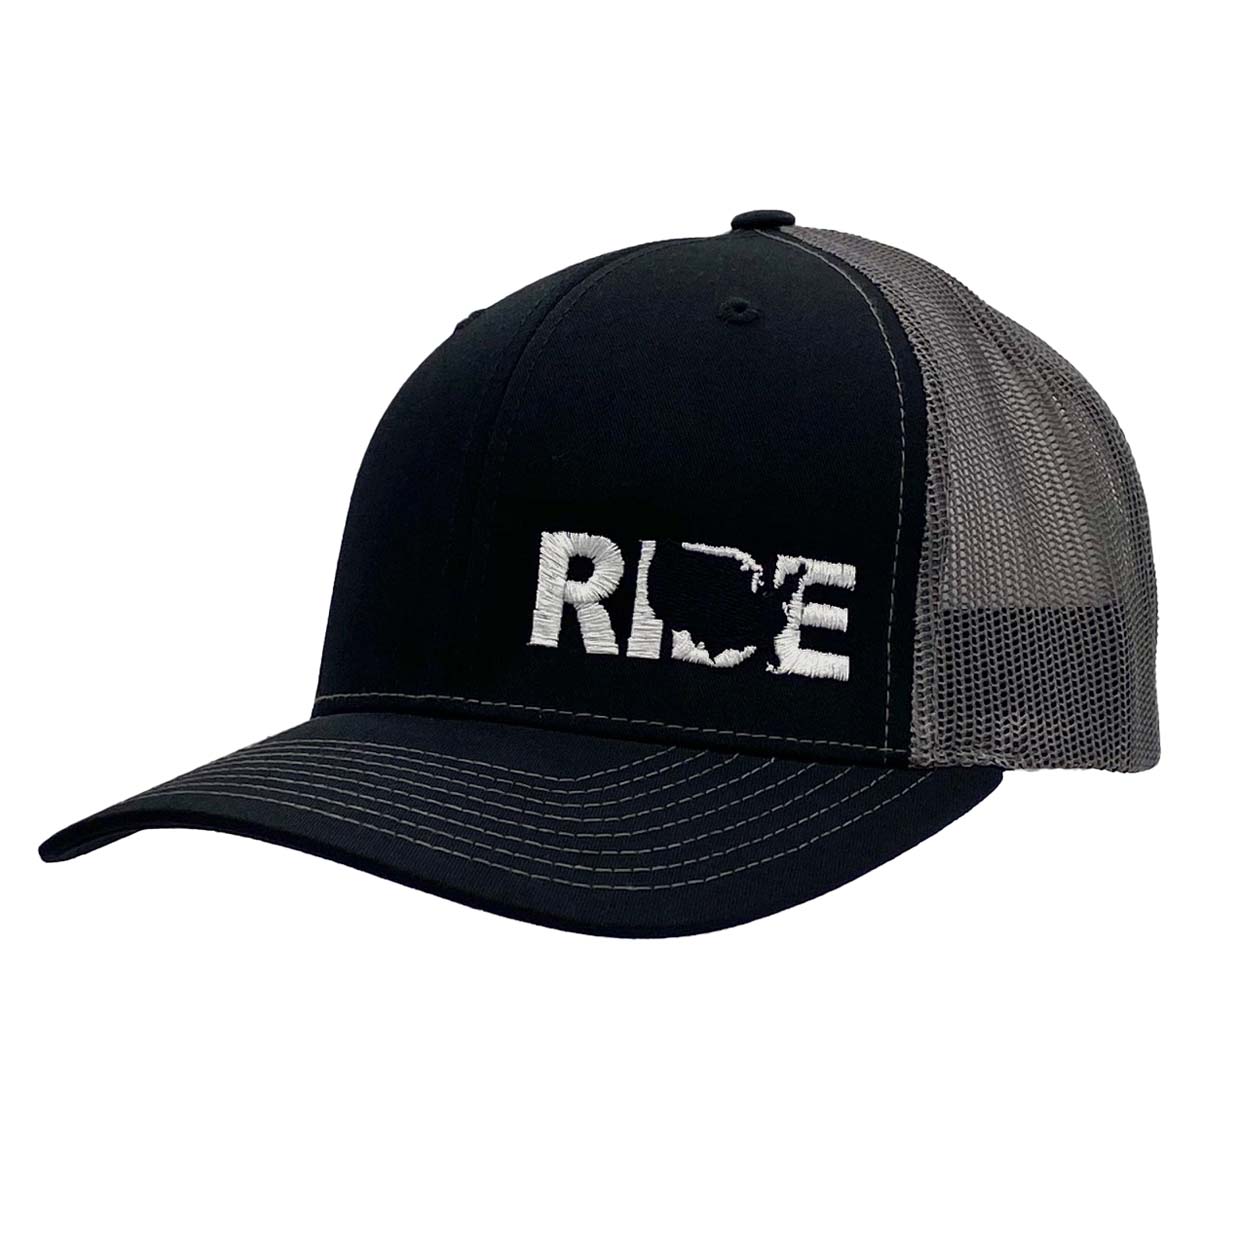 Ride United States Classic Pro Night Out Embroidered Snapback Trucker Hat Black/Gray